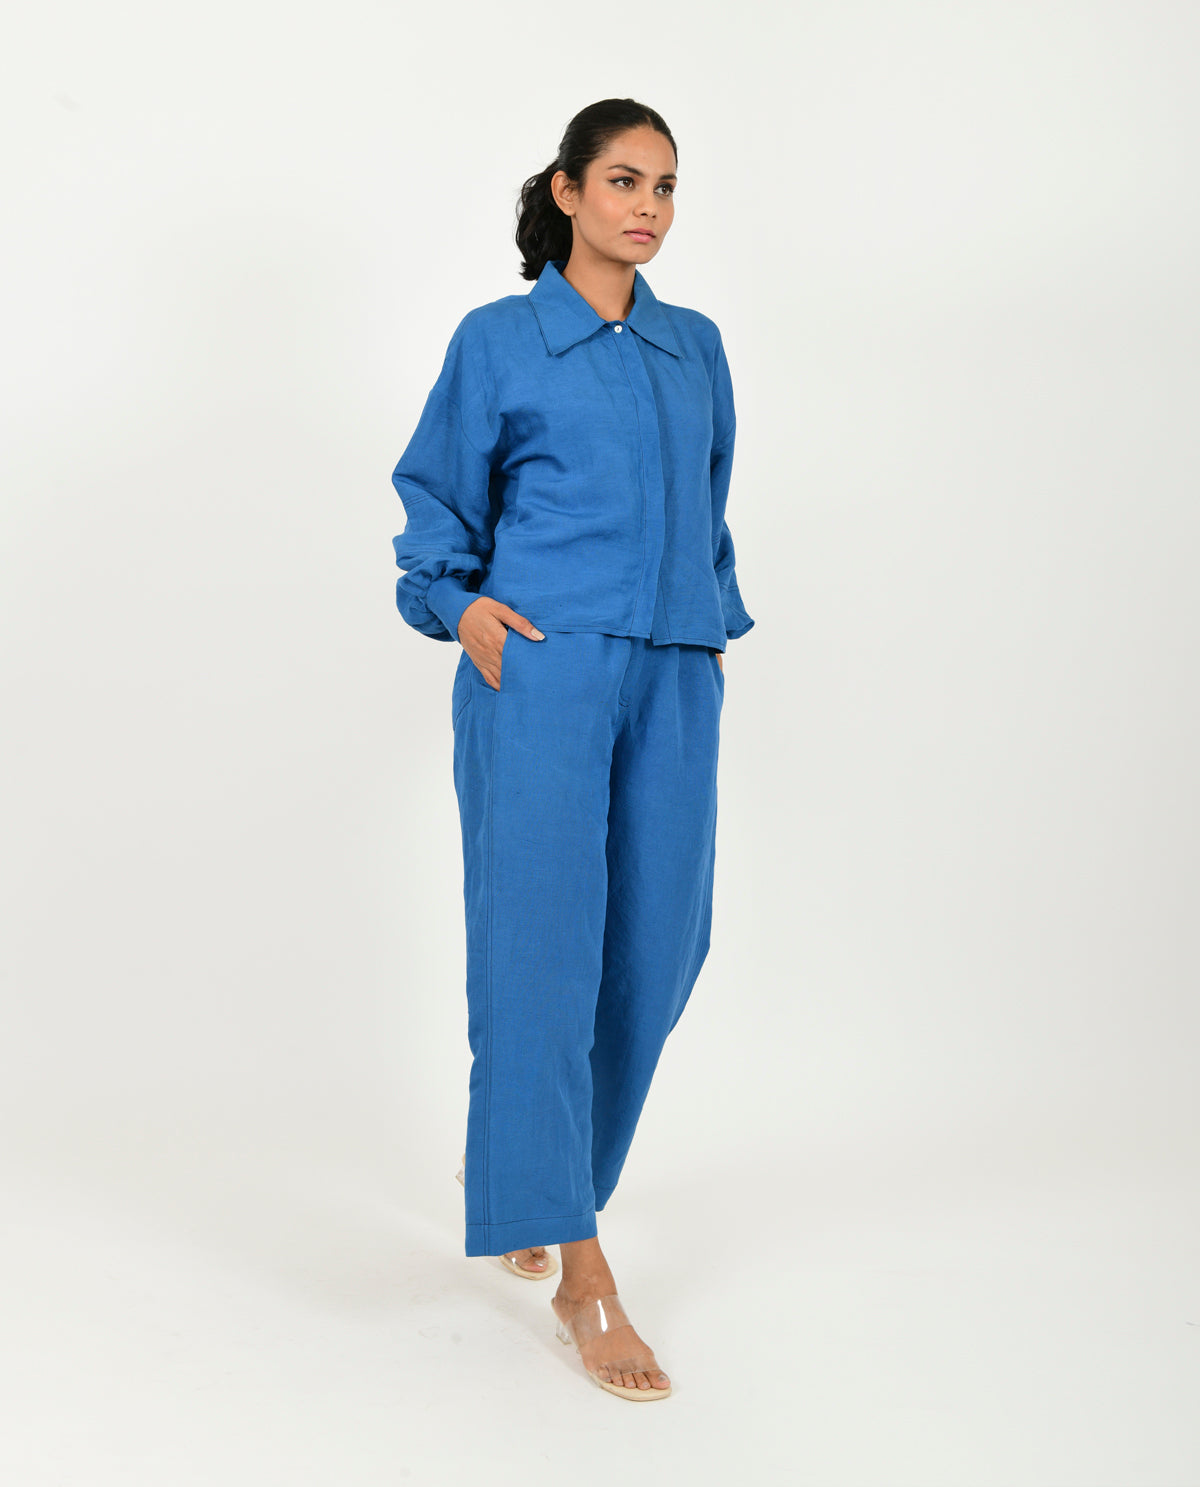 Blue Linen Co-ord Set by Rias Jaipur with Blue, Casual Wear, Co-ord Sets, Linen Blend, Natural, Relaxed Fit, Solids, Travel Co-ords, Womenswear, Yaadein, Yaadein by Rias Jaipur at Kamakhyaa for sustainable fashion